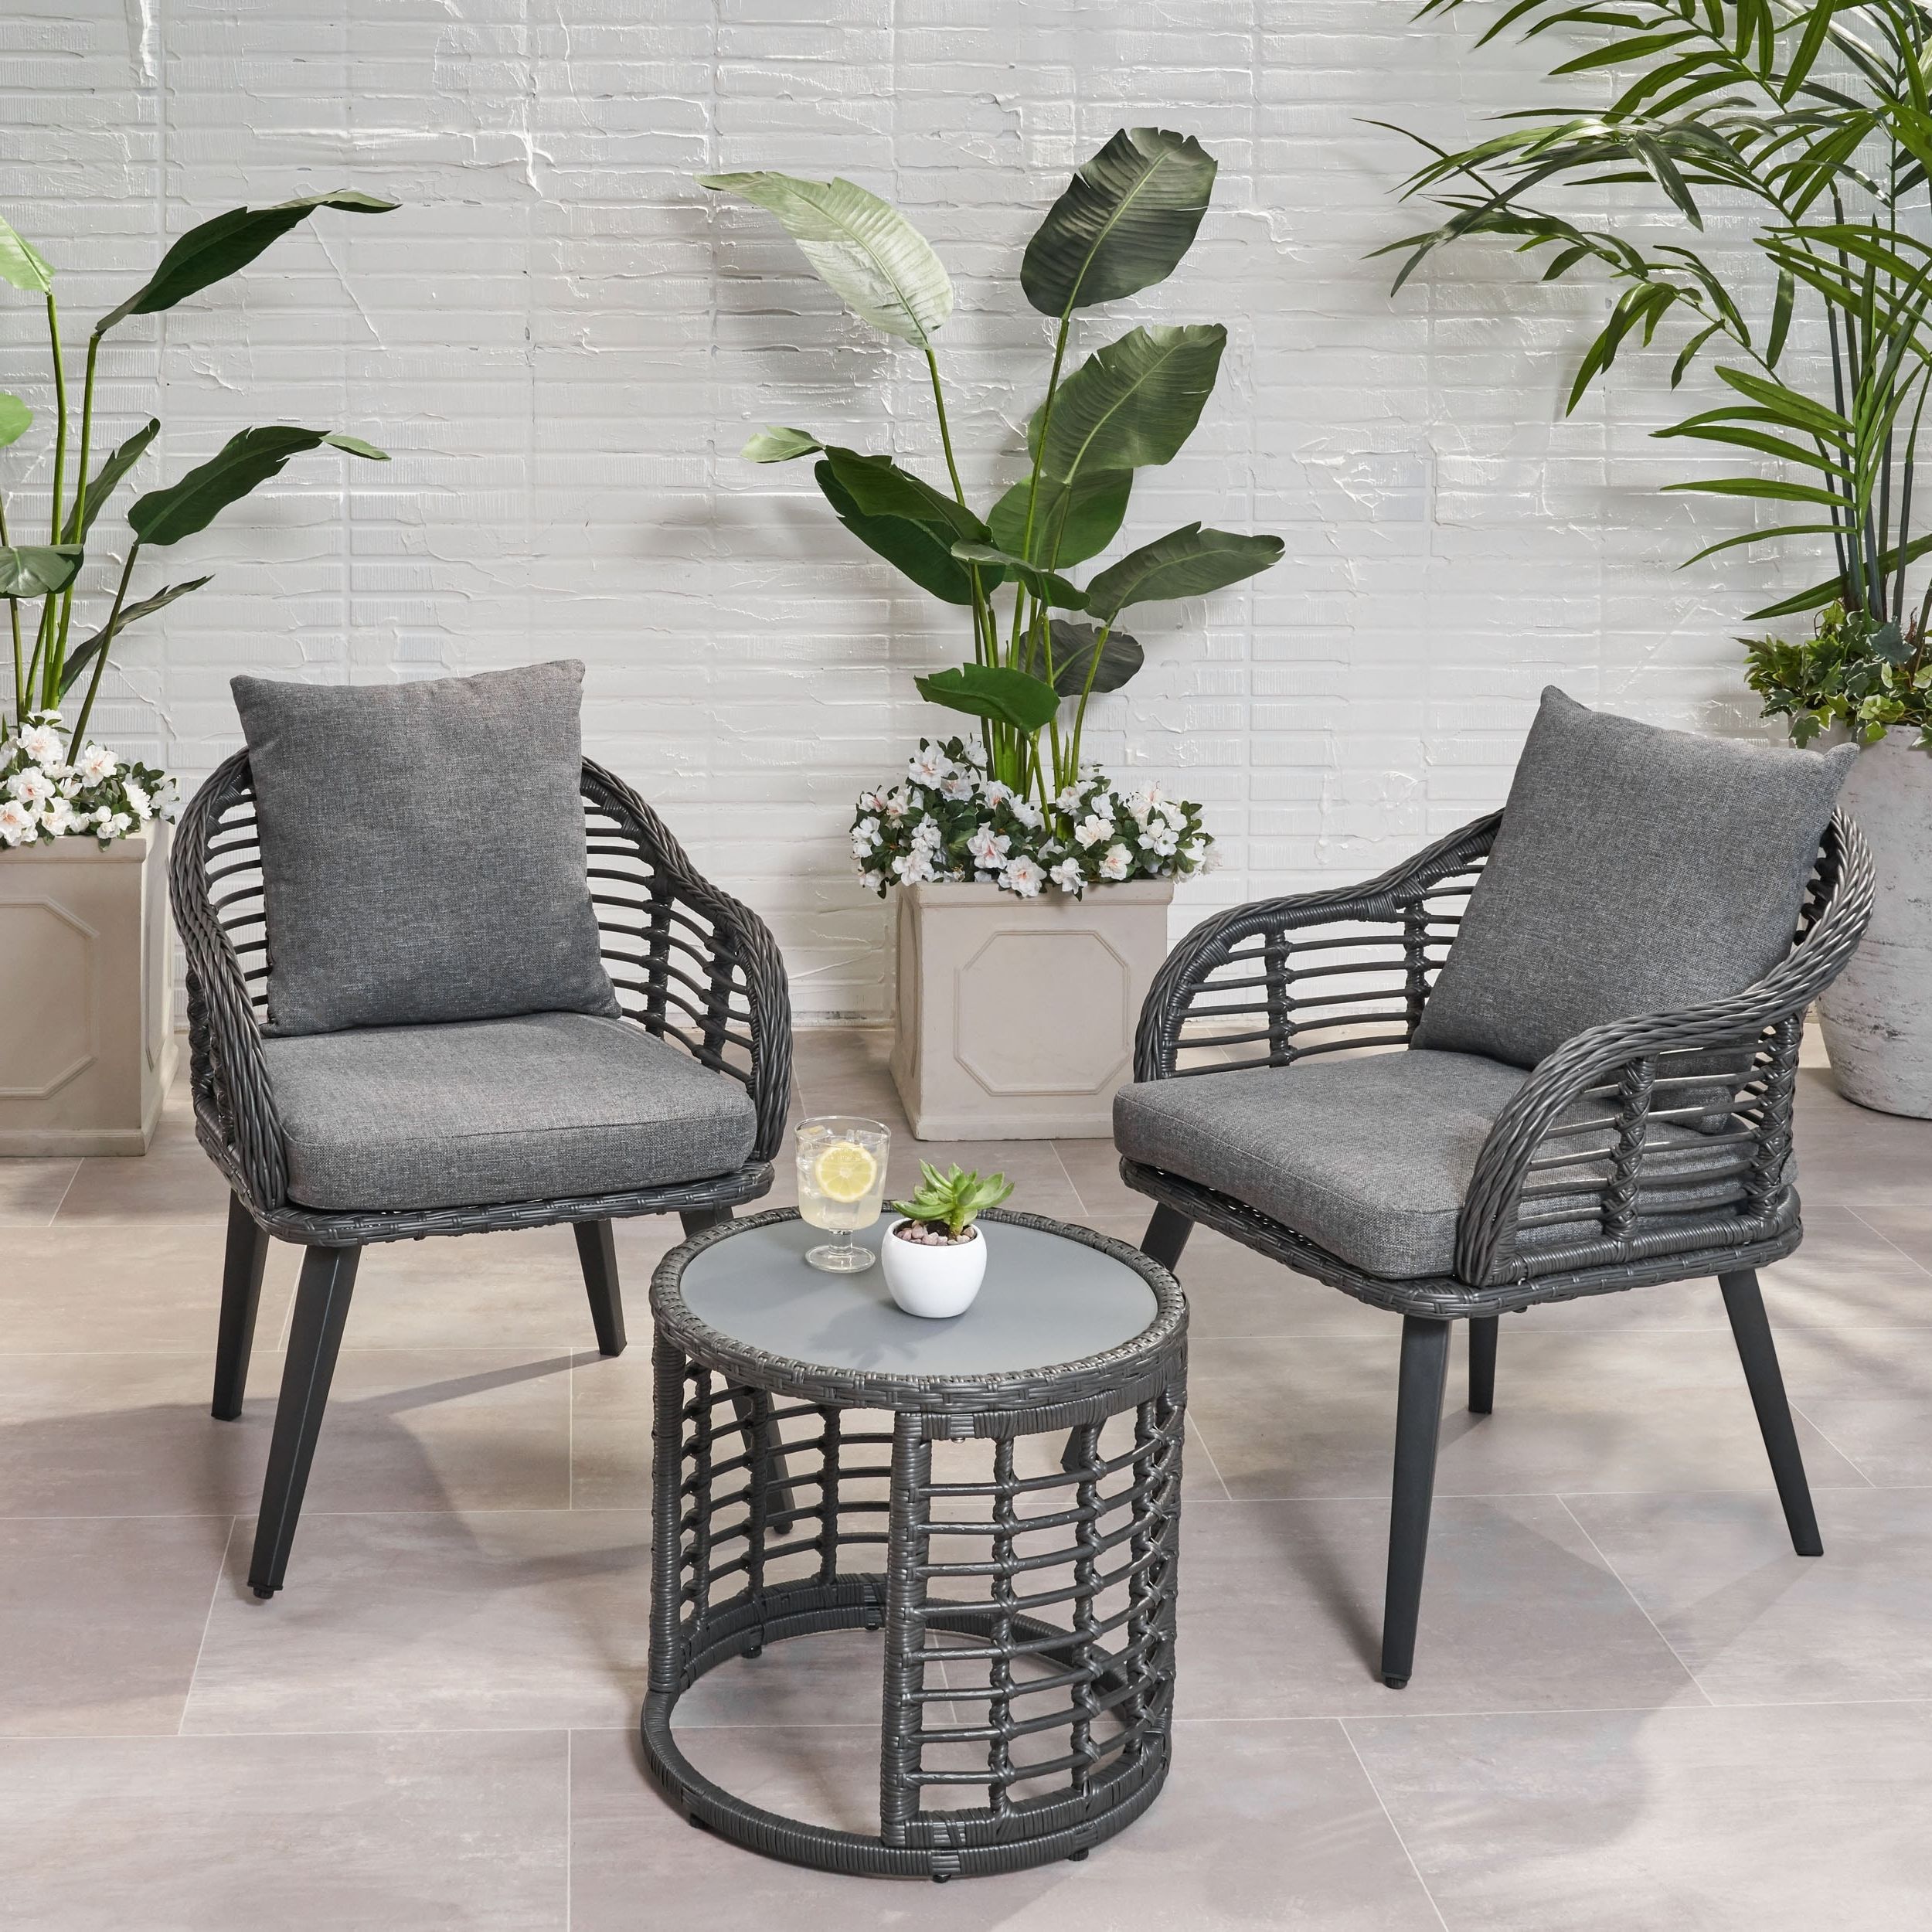 Well Known Tatiana Outdoor 3 Piece Boho Wicker Chat Setchristopher Knight Home –  Overstock – 28987059 Within 3 Piece Outdoor Boho Wicker Chat Set (Photo 5 of 15)